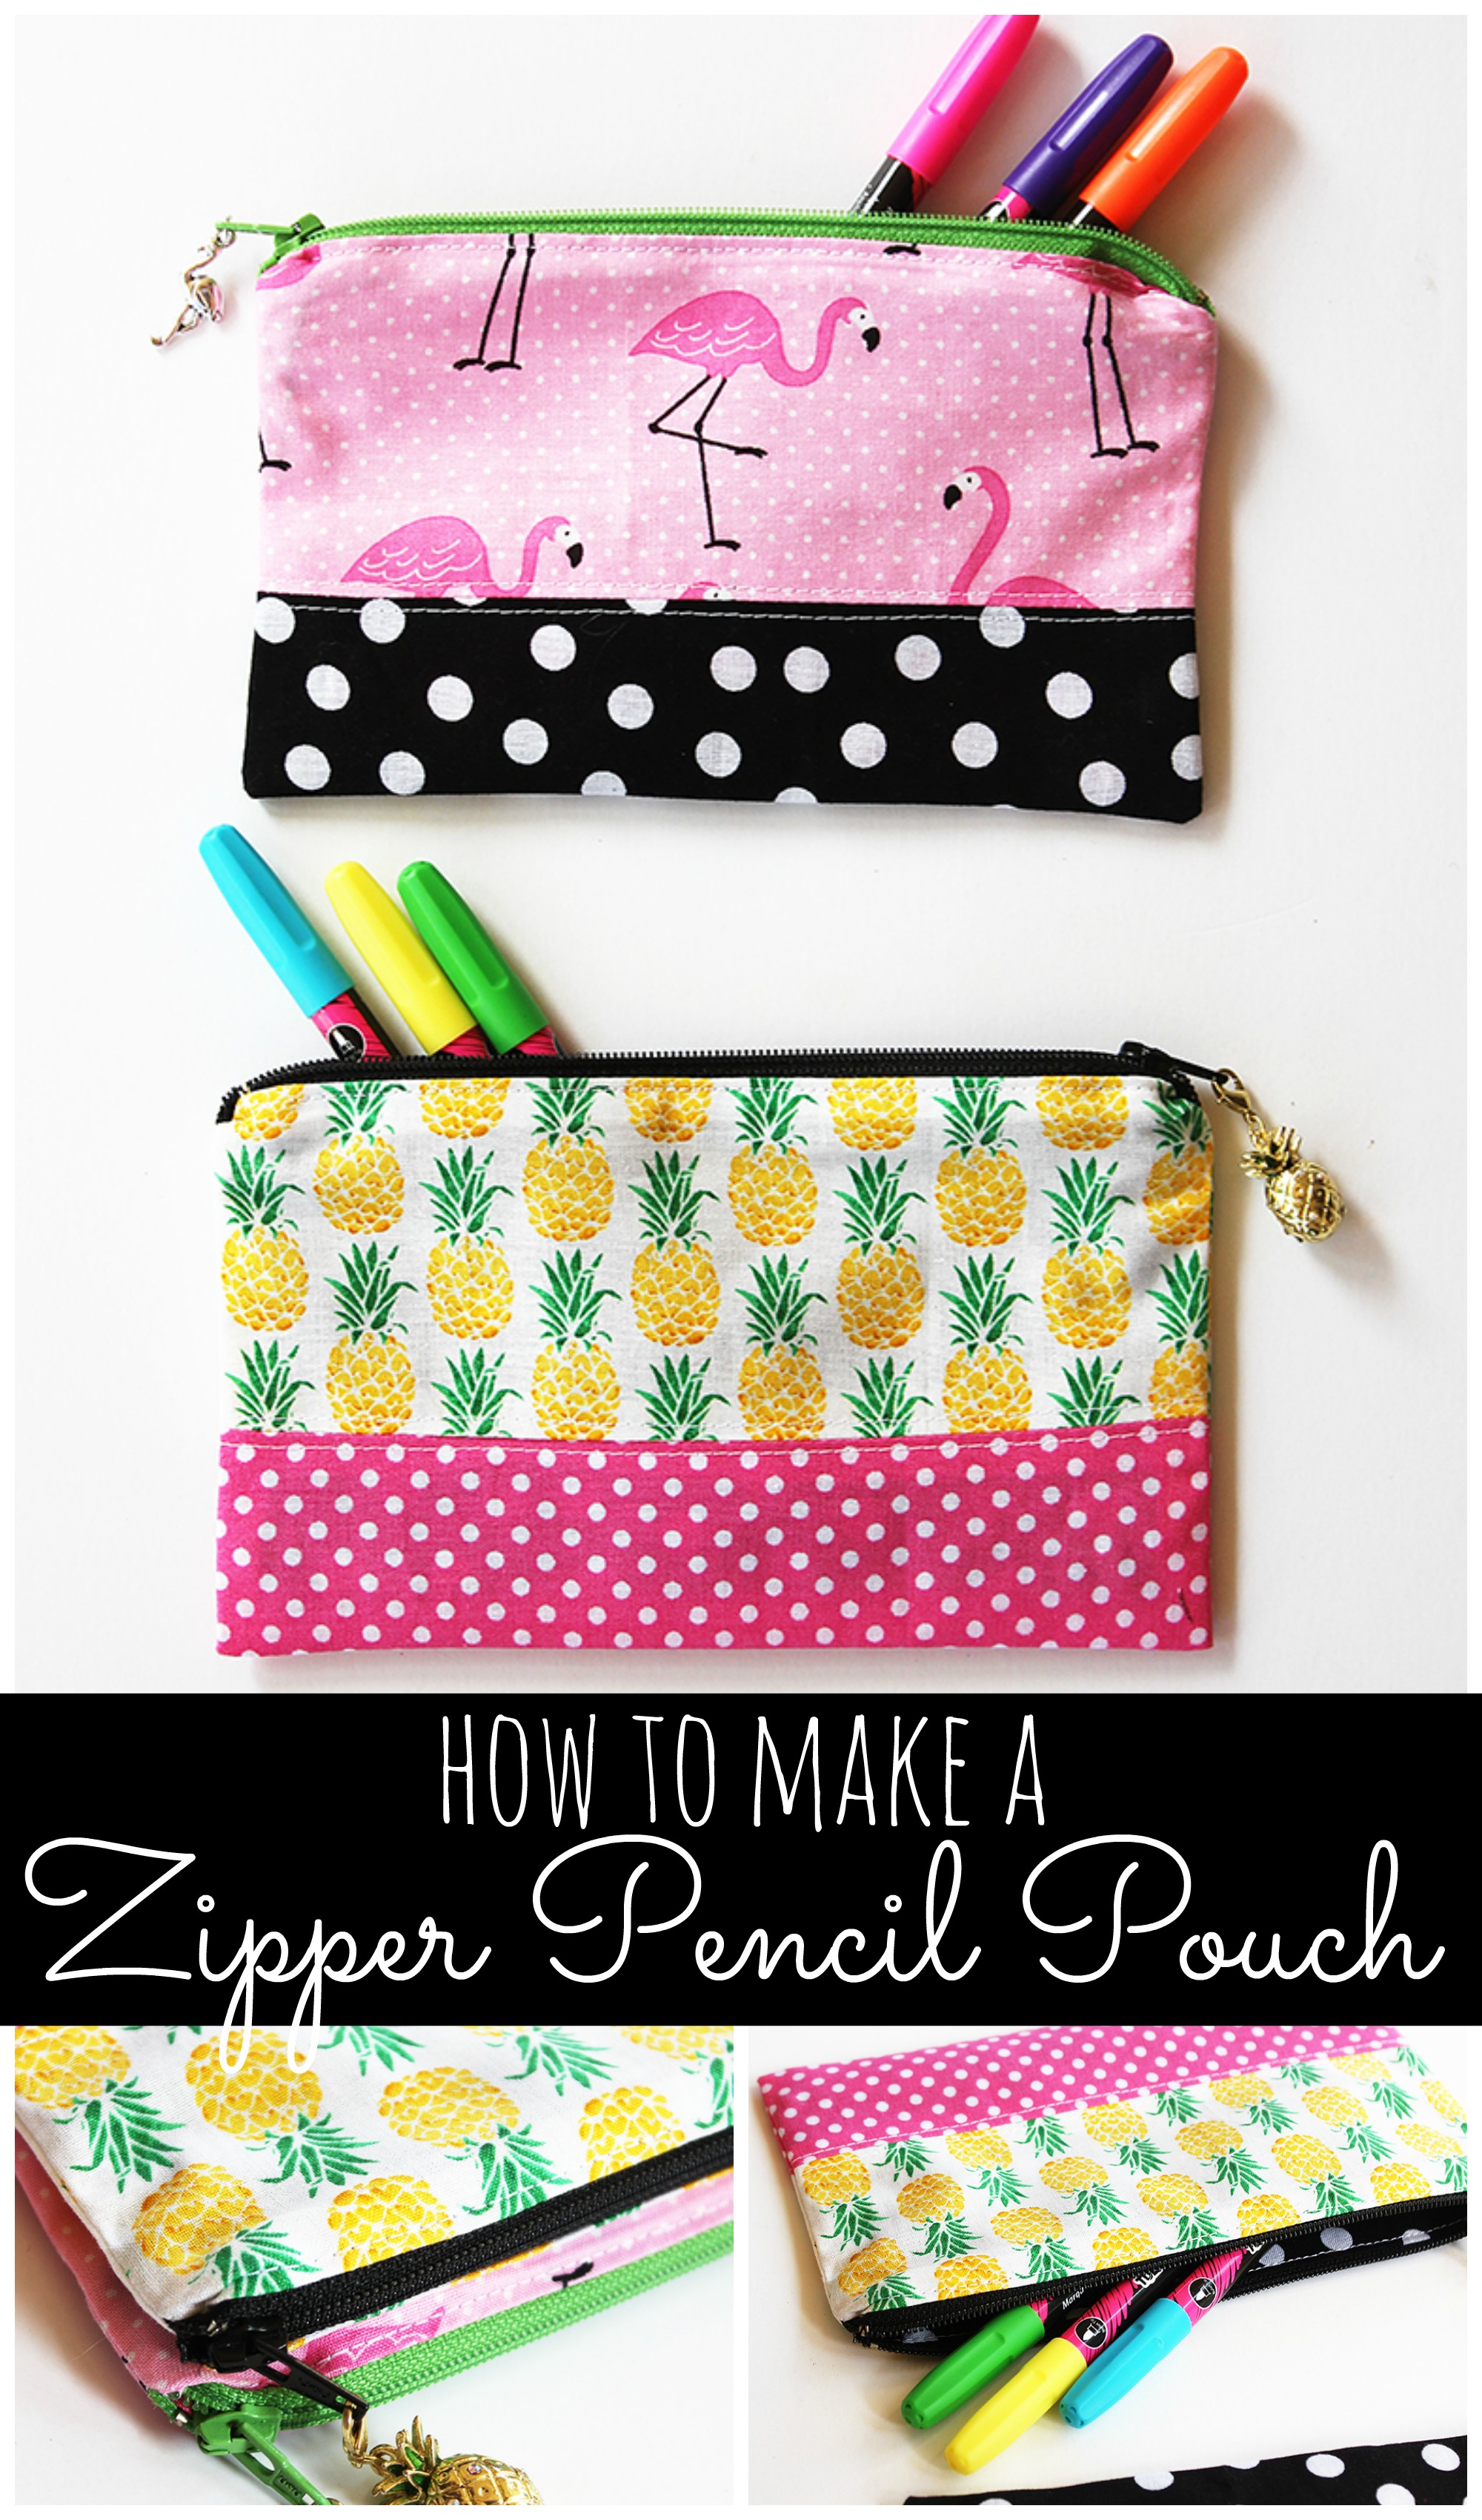 Zipper Pencil Pouch Sewing Tutorial - Positively Splendid {Crafts